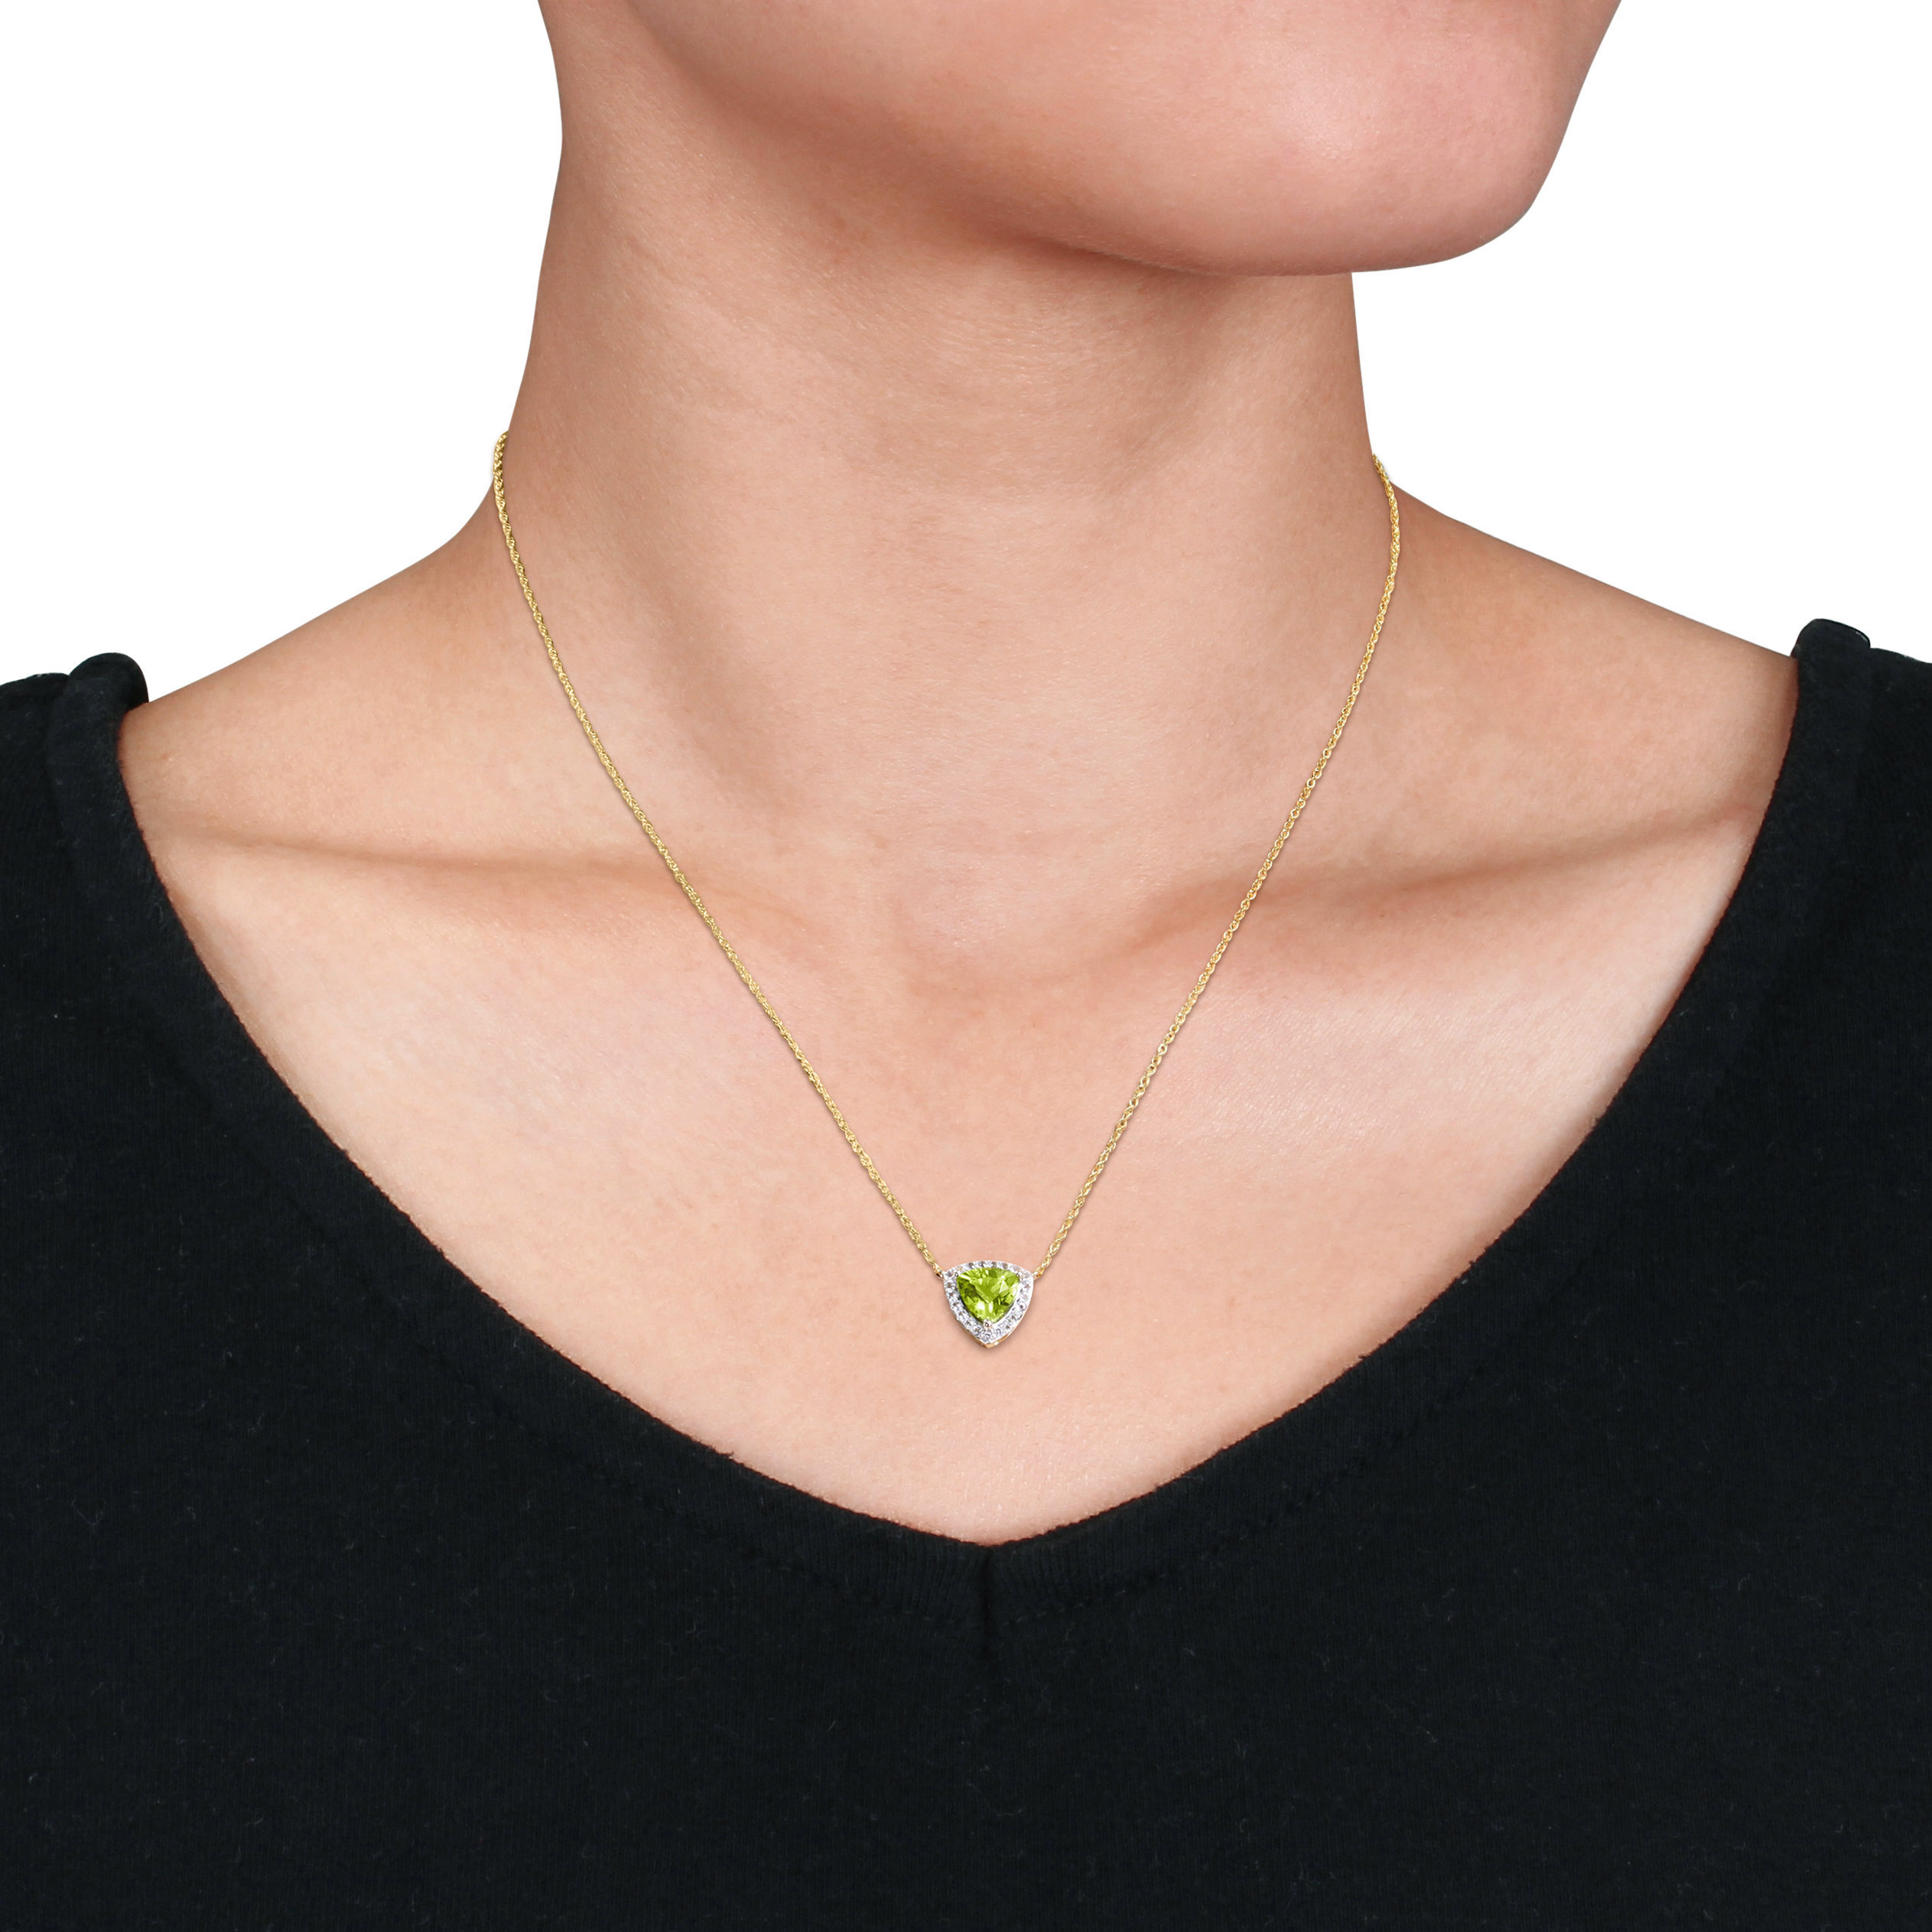 1 1/2 CT TGW Trillion Peridot and White Topaz Halo Necklace in 10k Yellow Gold - 17 in.